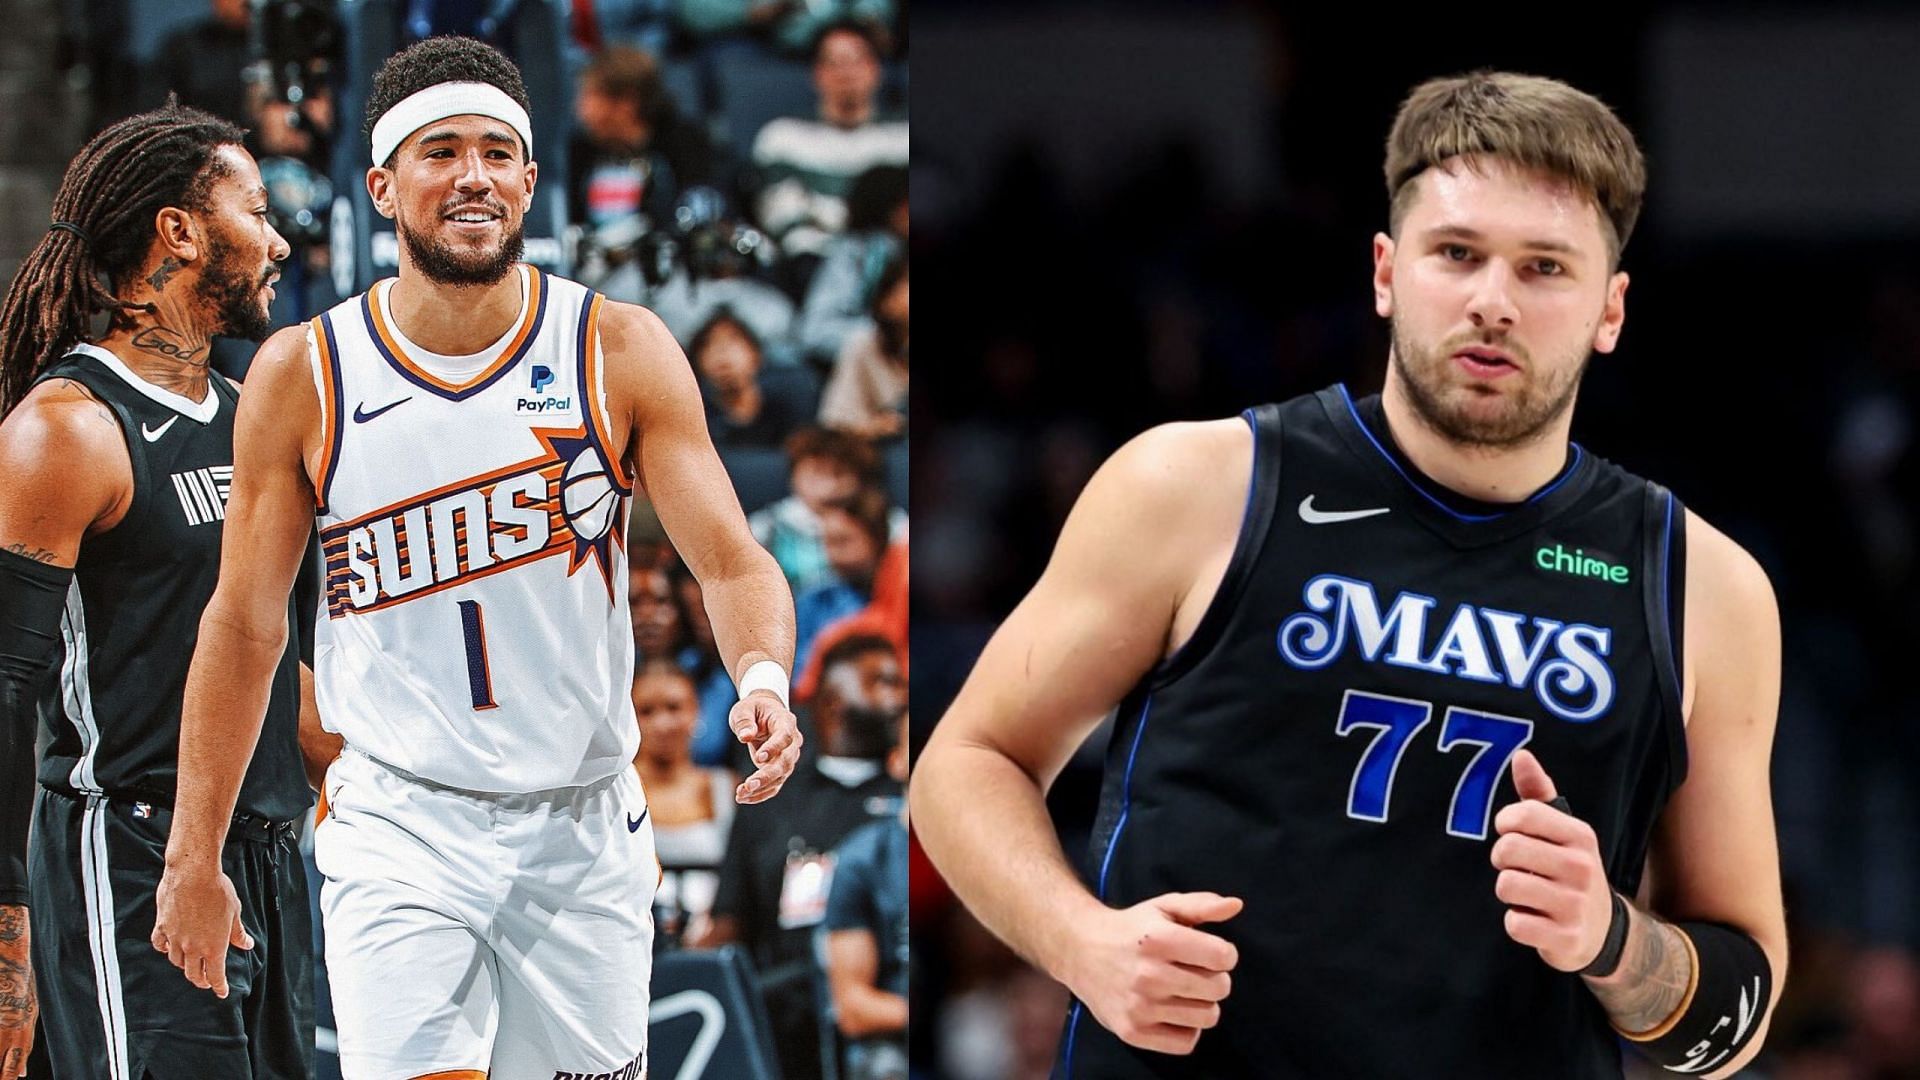 &quot;Mutual and high level&quot;: Devin Booker squashes rivalry rumors, praises Luka Doncic